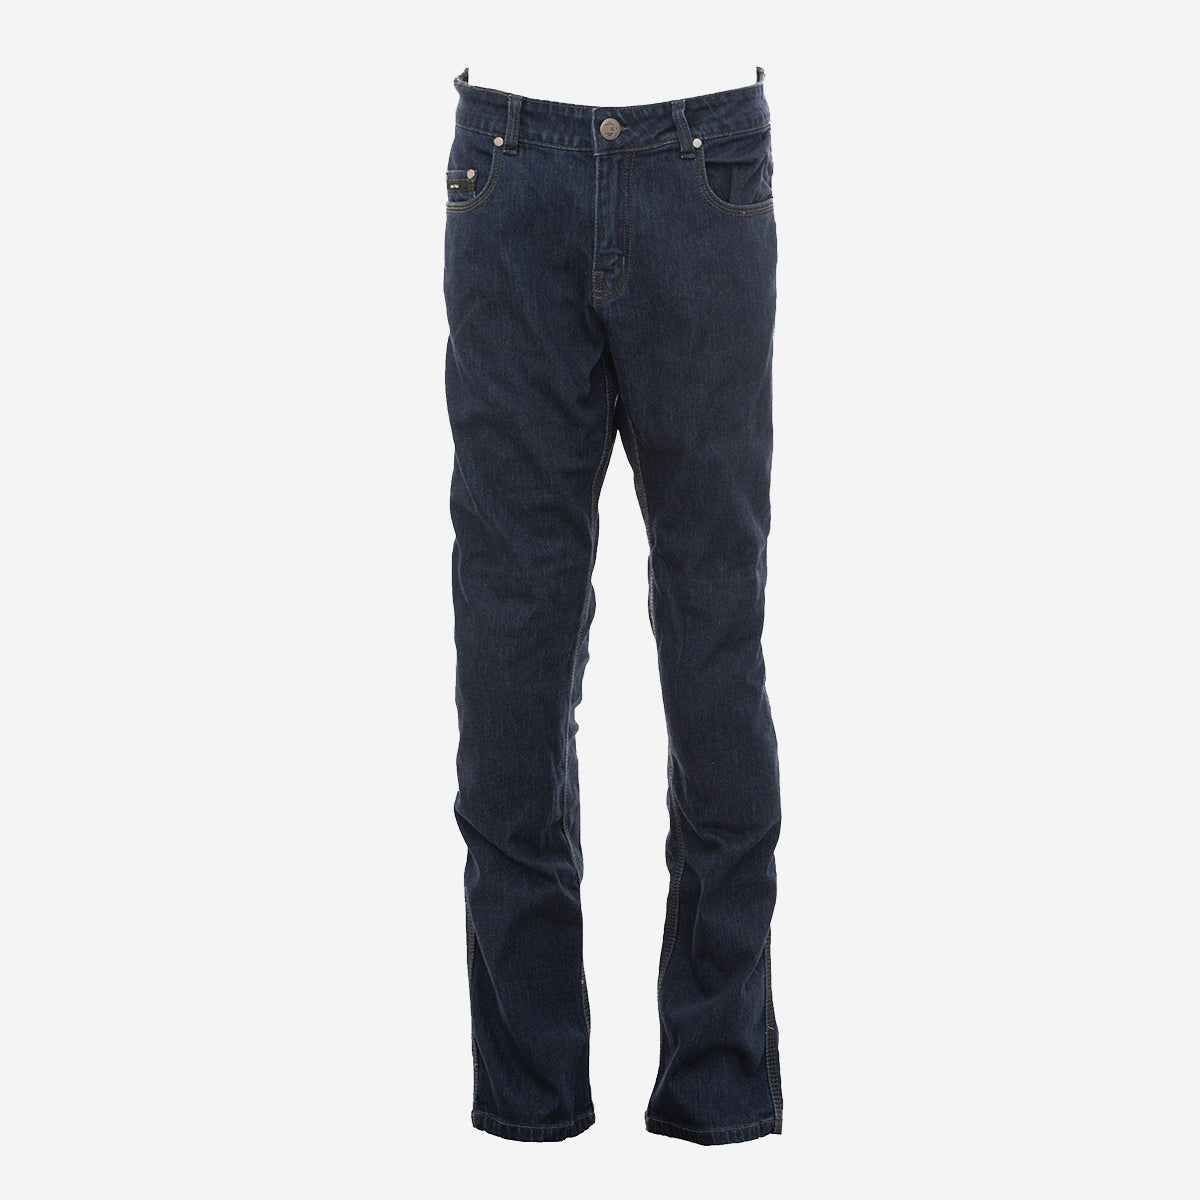 Roadster Men Skinny Fit Jeans in Ahmedabad - Dealers, Manufacturers &  Suppliers -Justdial